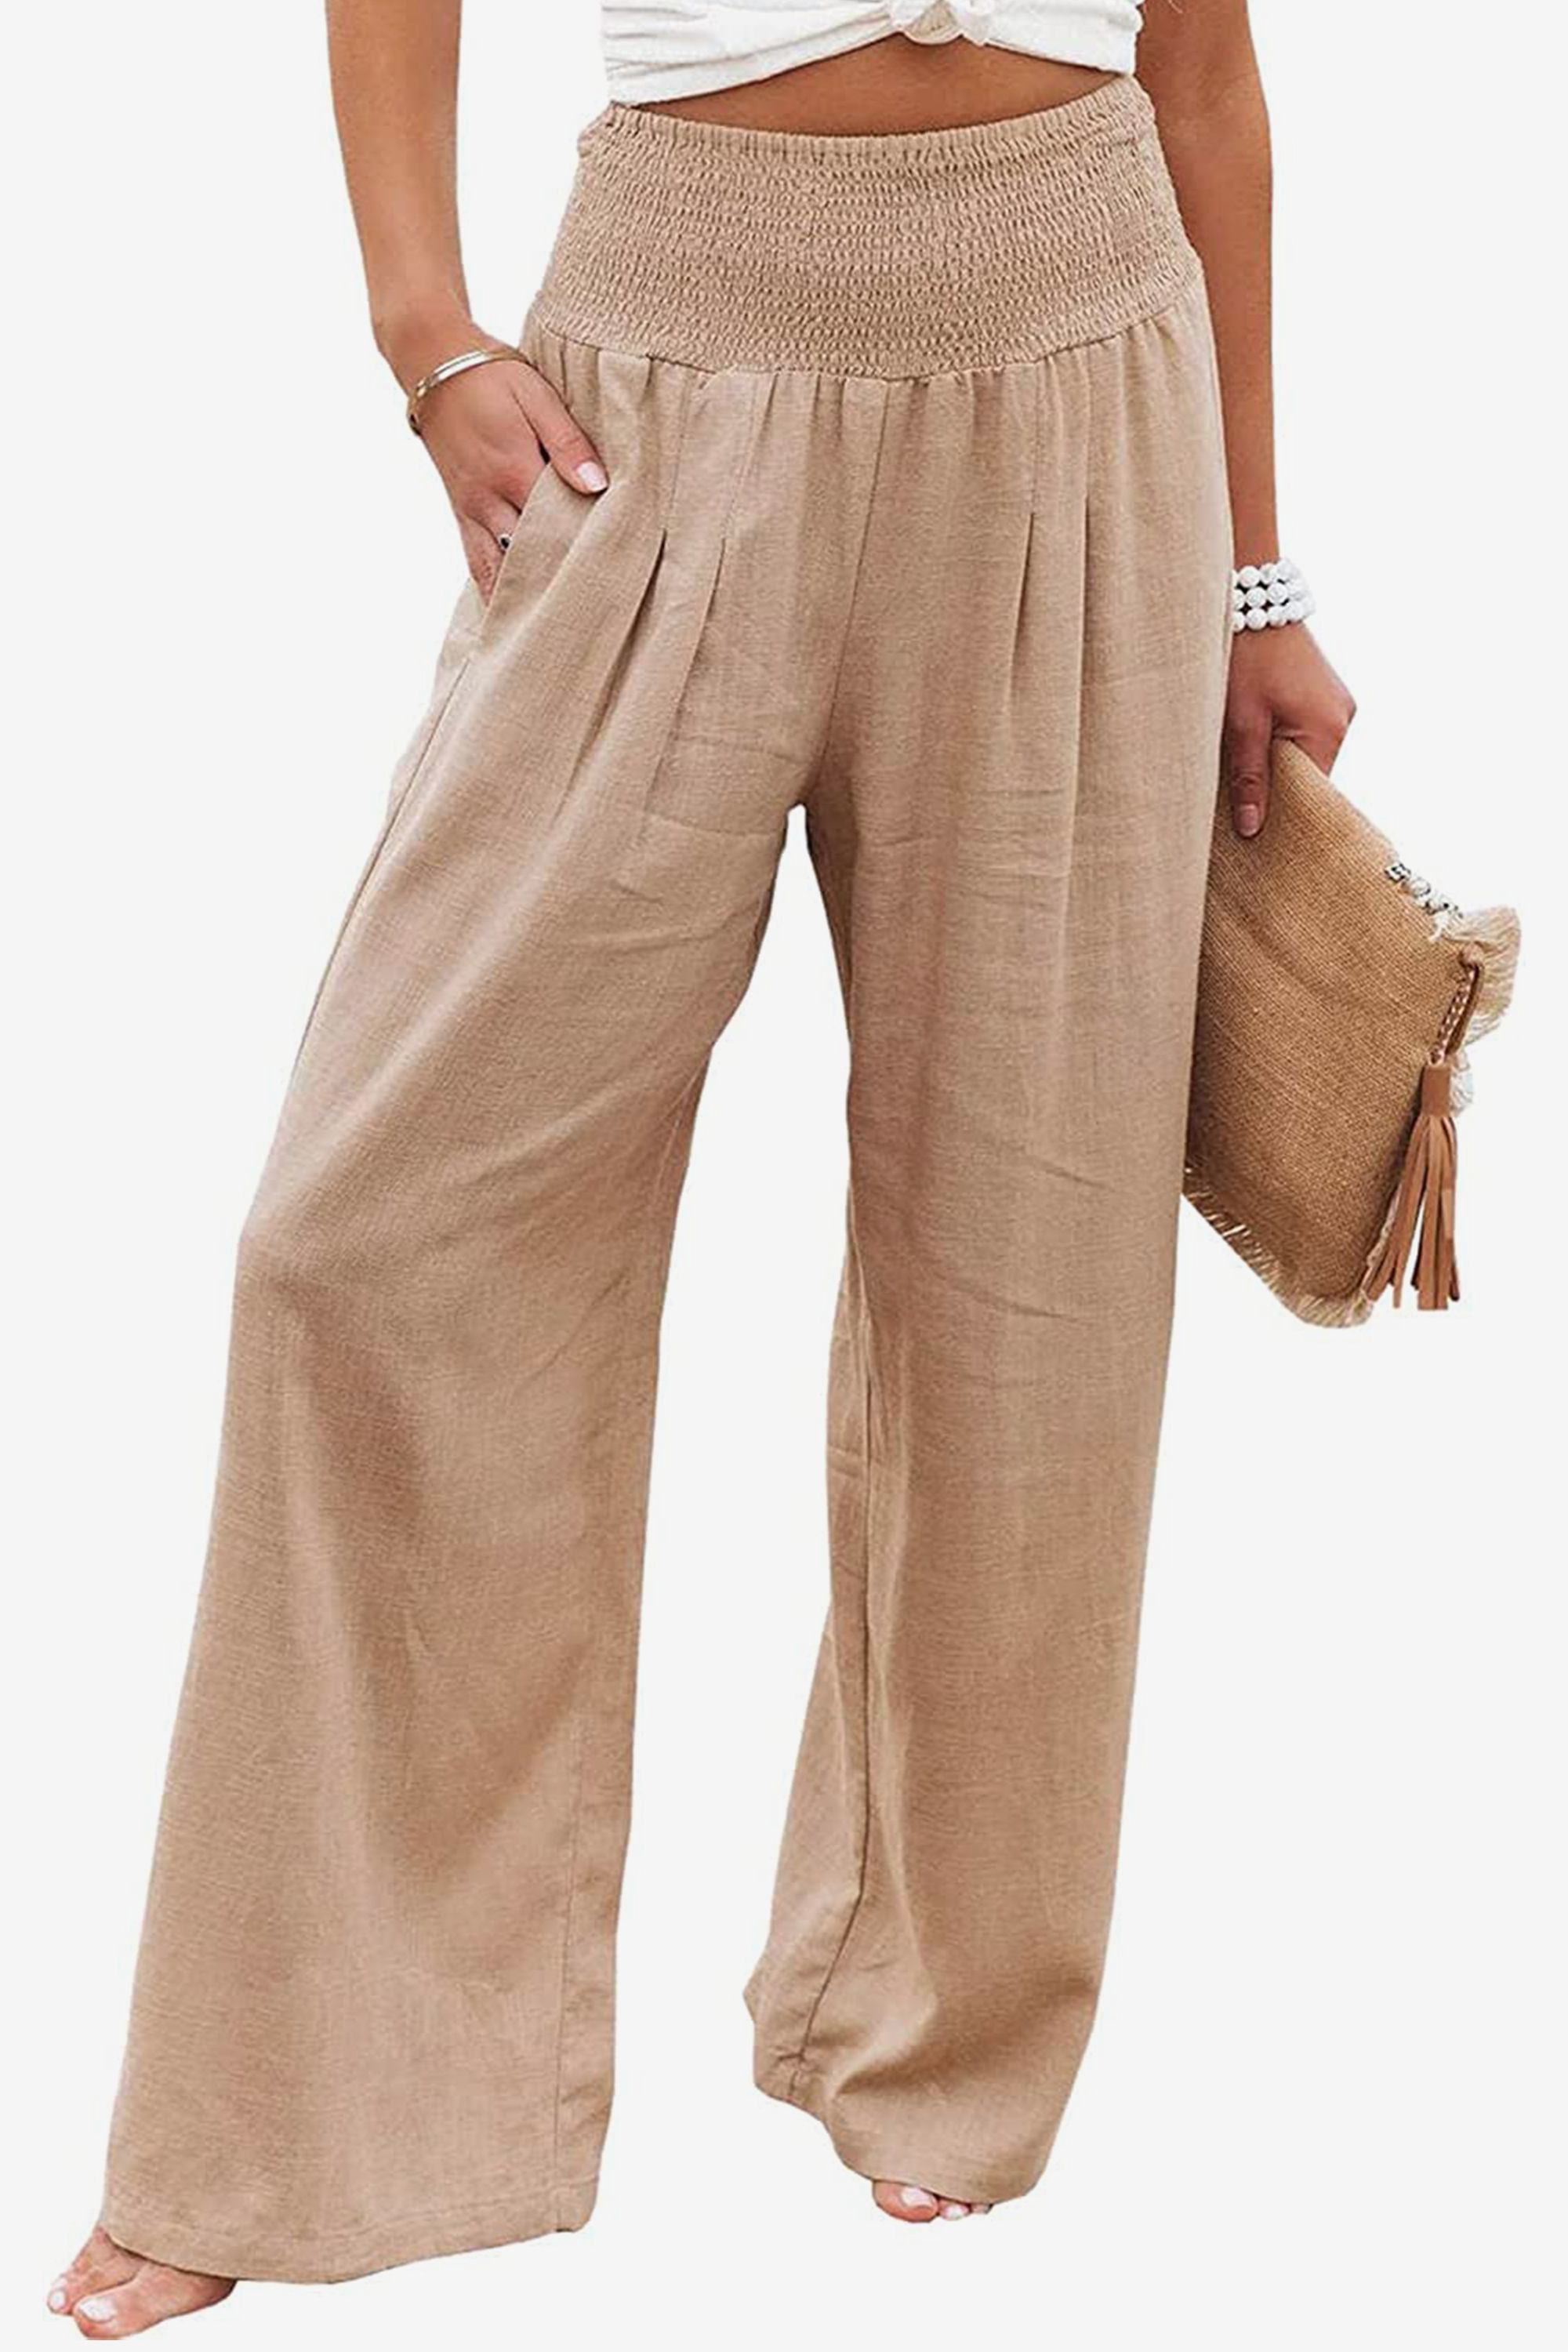 The Best Types of Summer Pants to Wear All Season